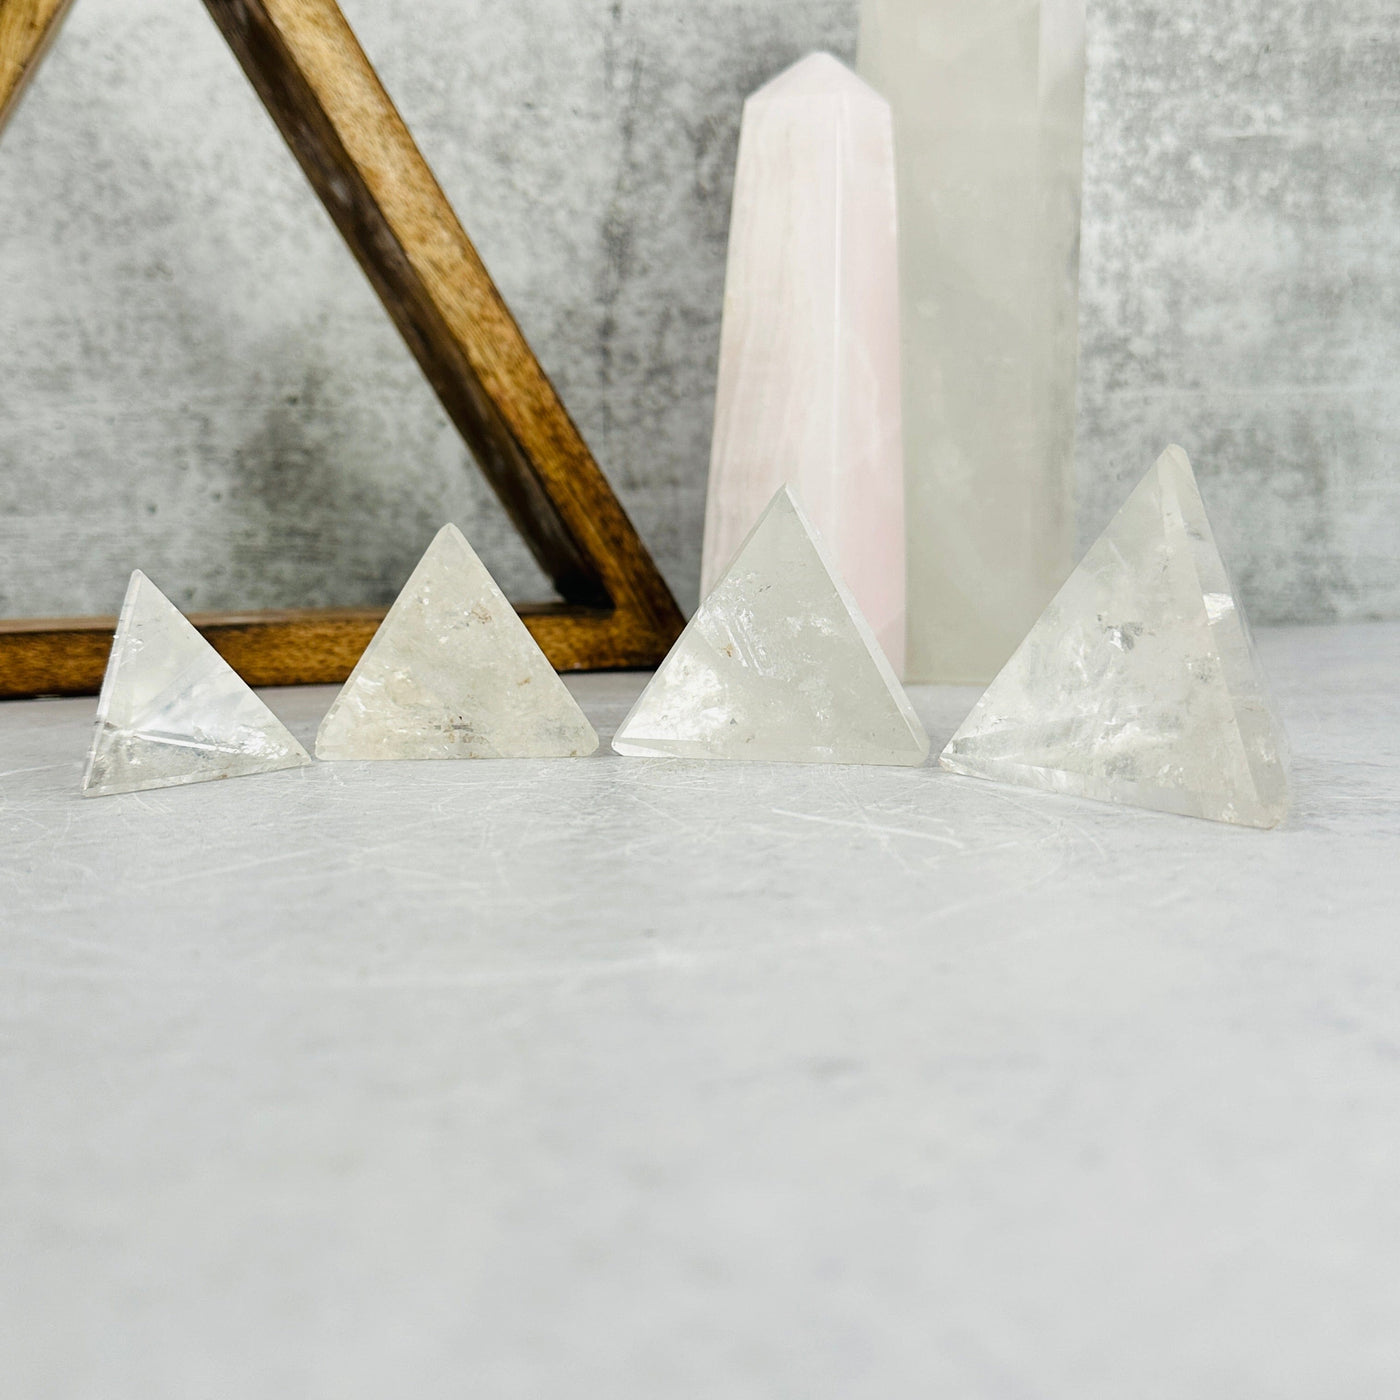 crystal quartz pyramids with decorations in the background